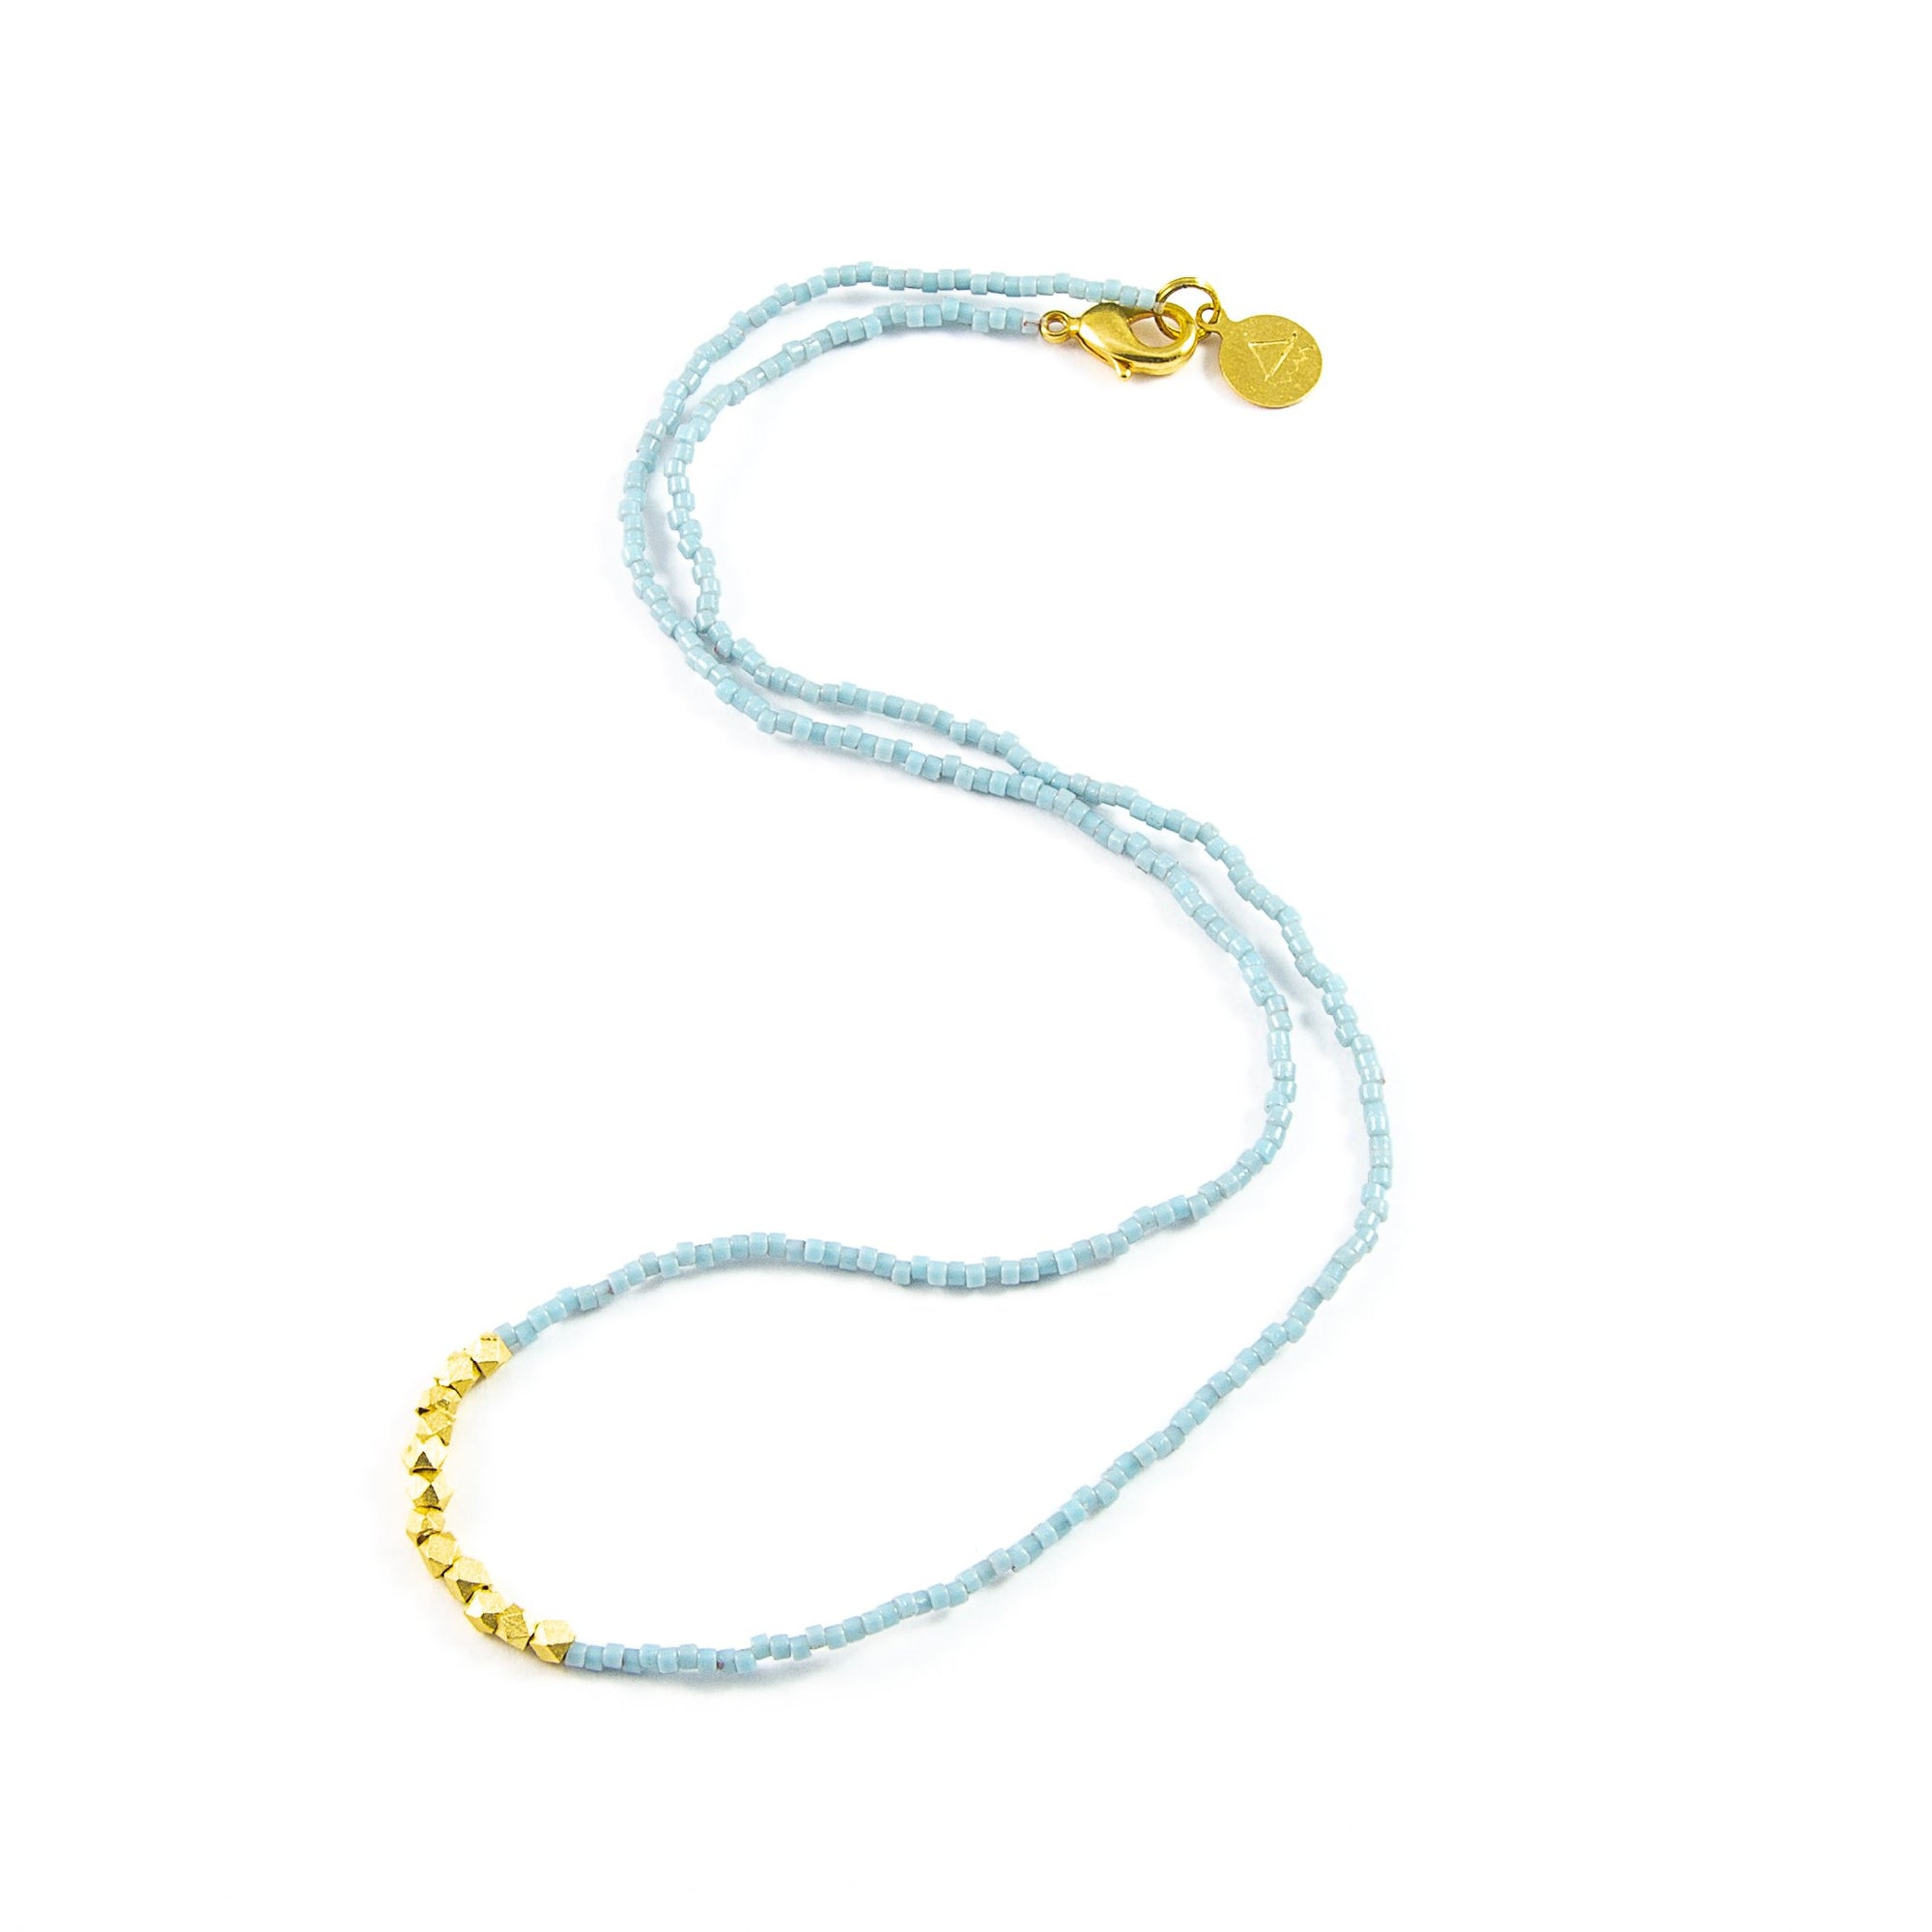 Stormy Ocean Day to Night Necklace in Gold